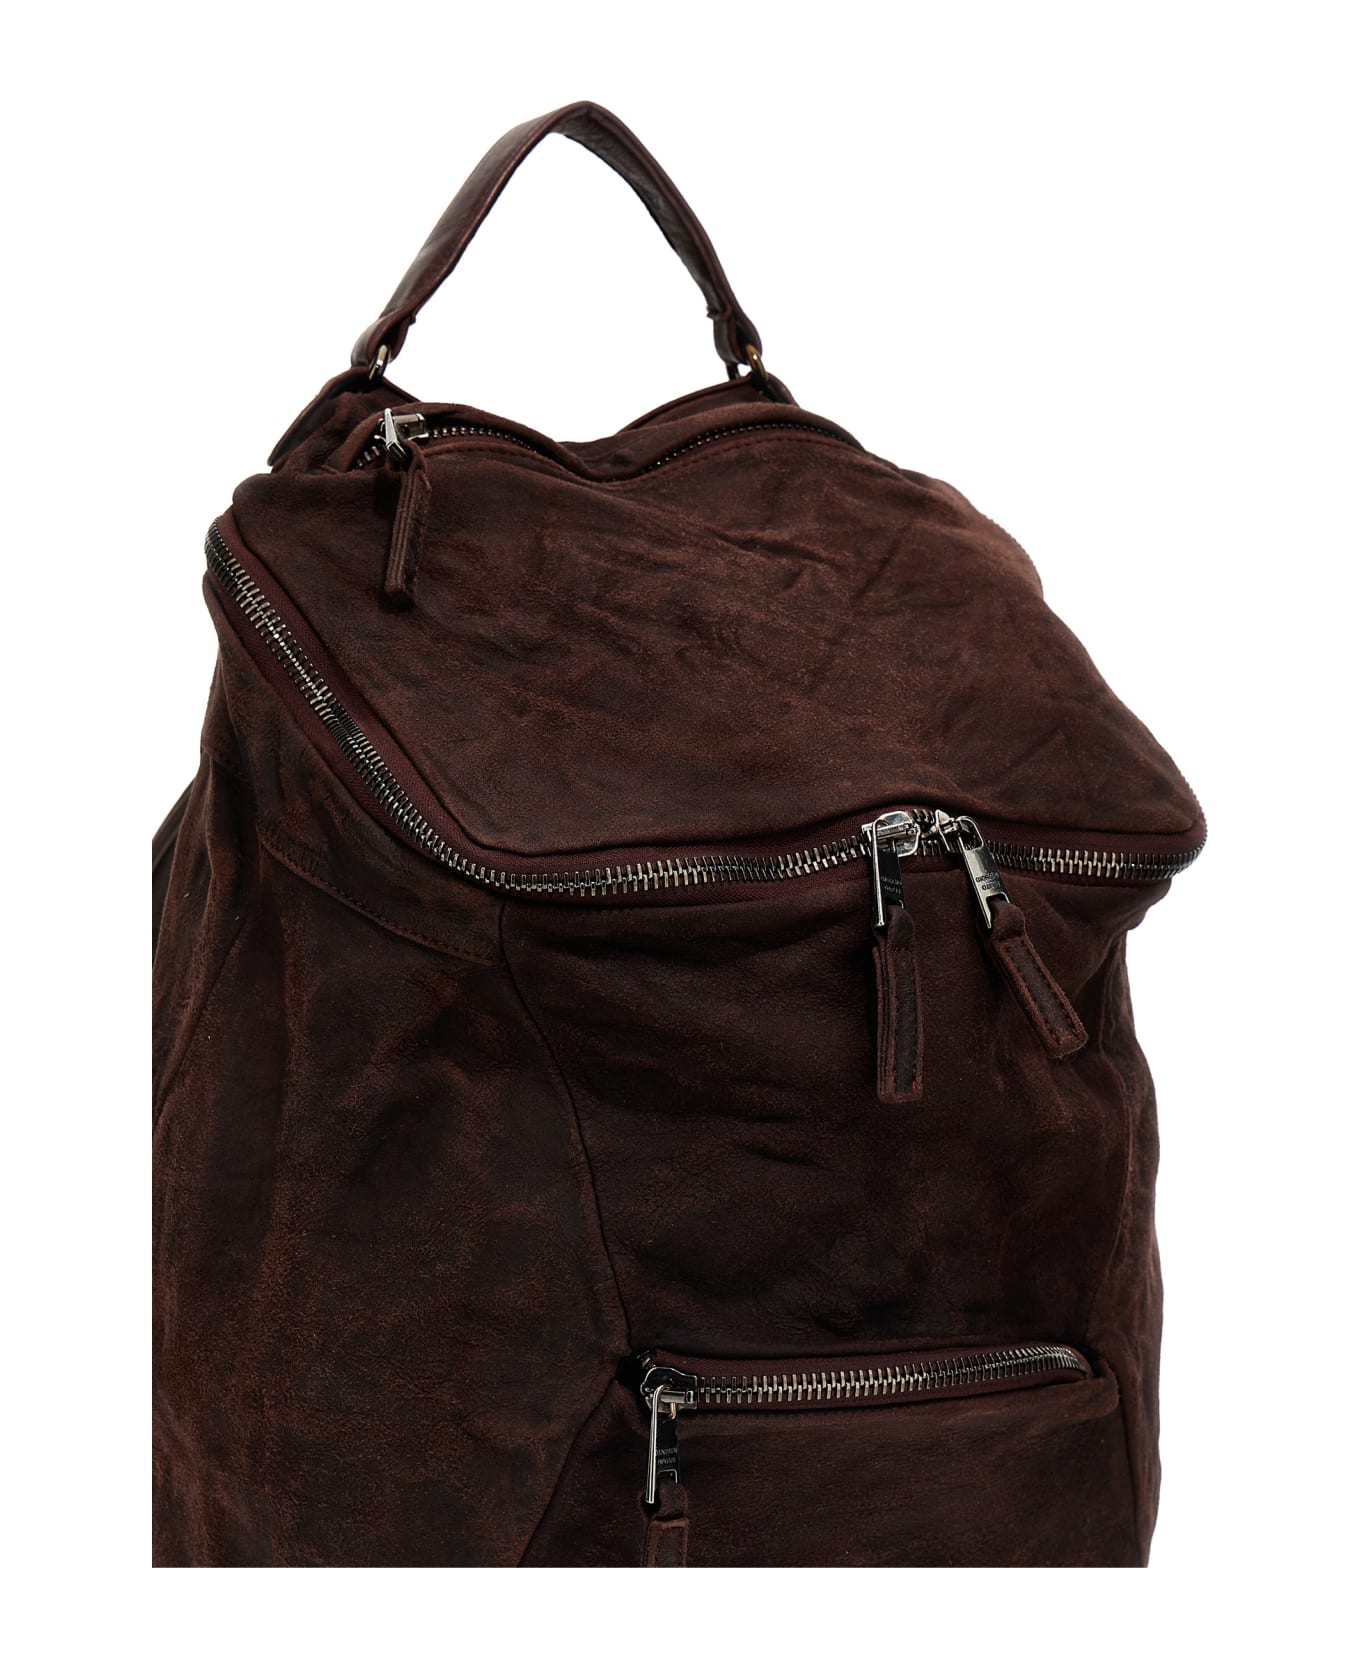 Giorgio Brato Leather Backpack - Bordeaux バックパック